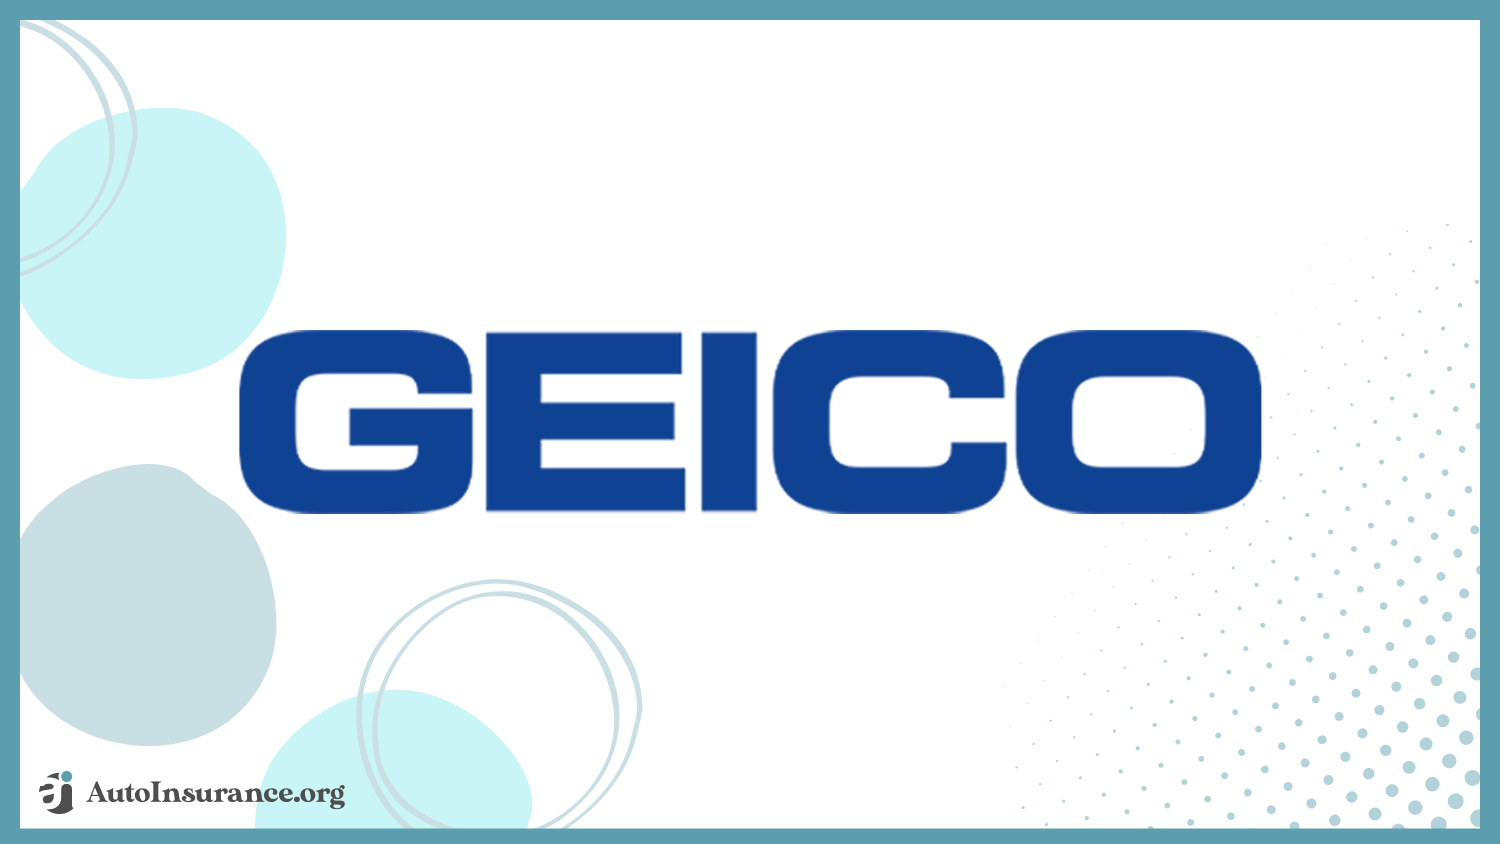 Geico: Best Auto Insurance for Luxury Cars